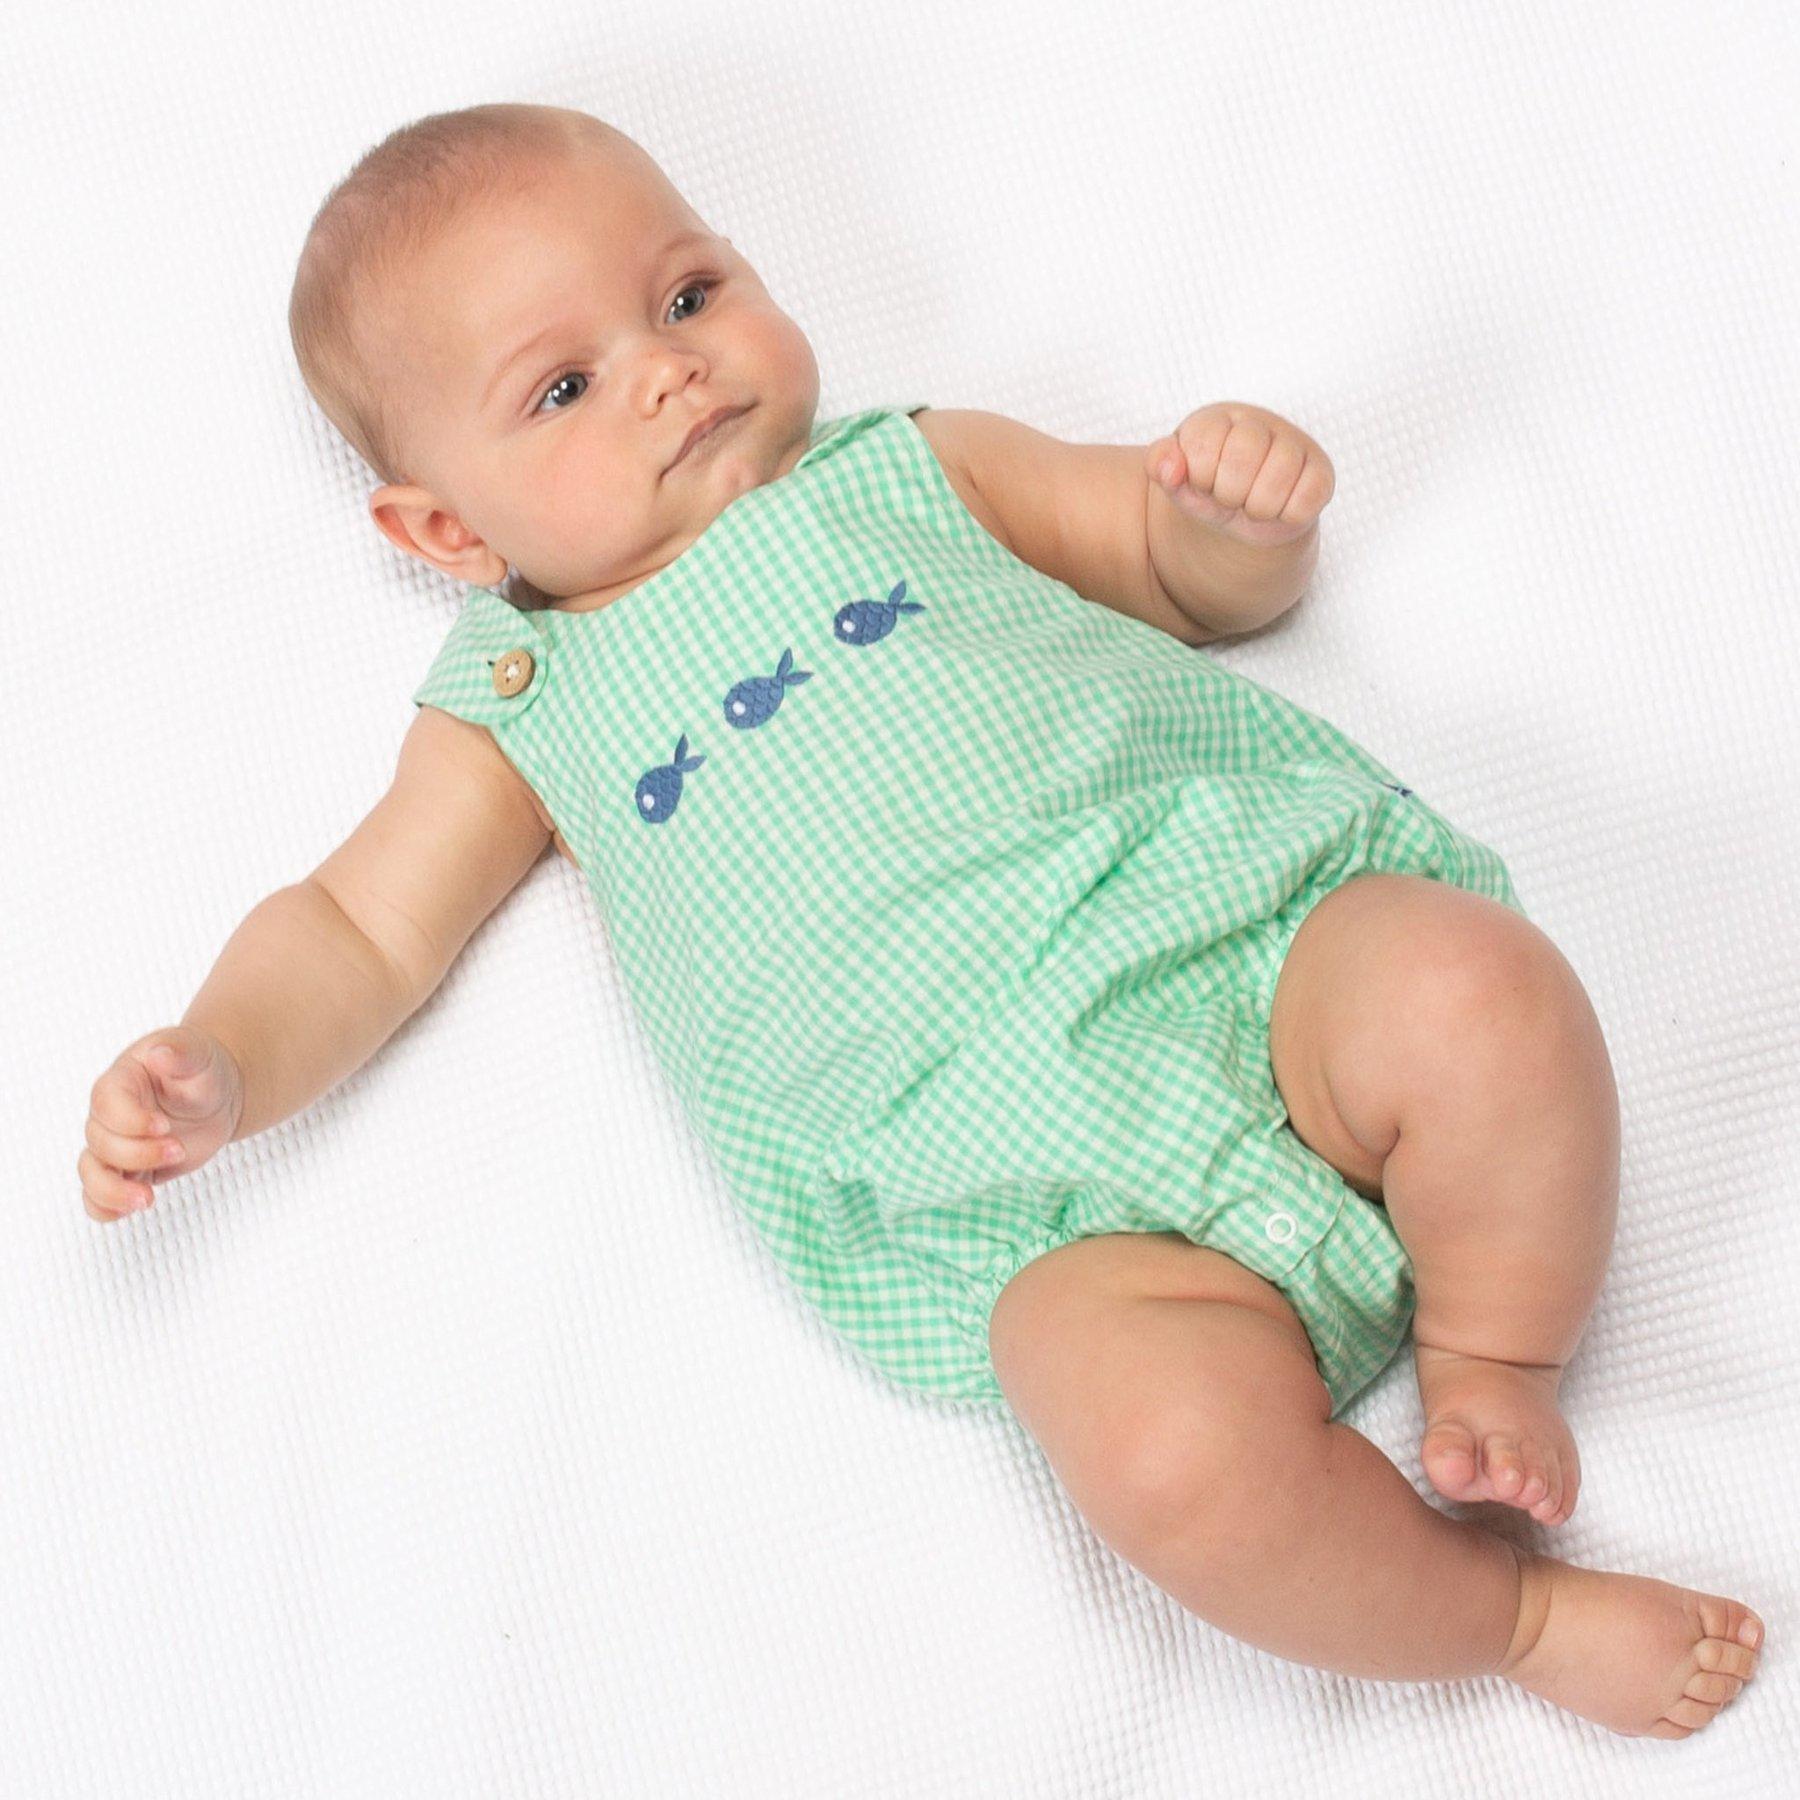 Baby wearing Kite Clothing Fish Bubble Romper